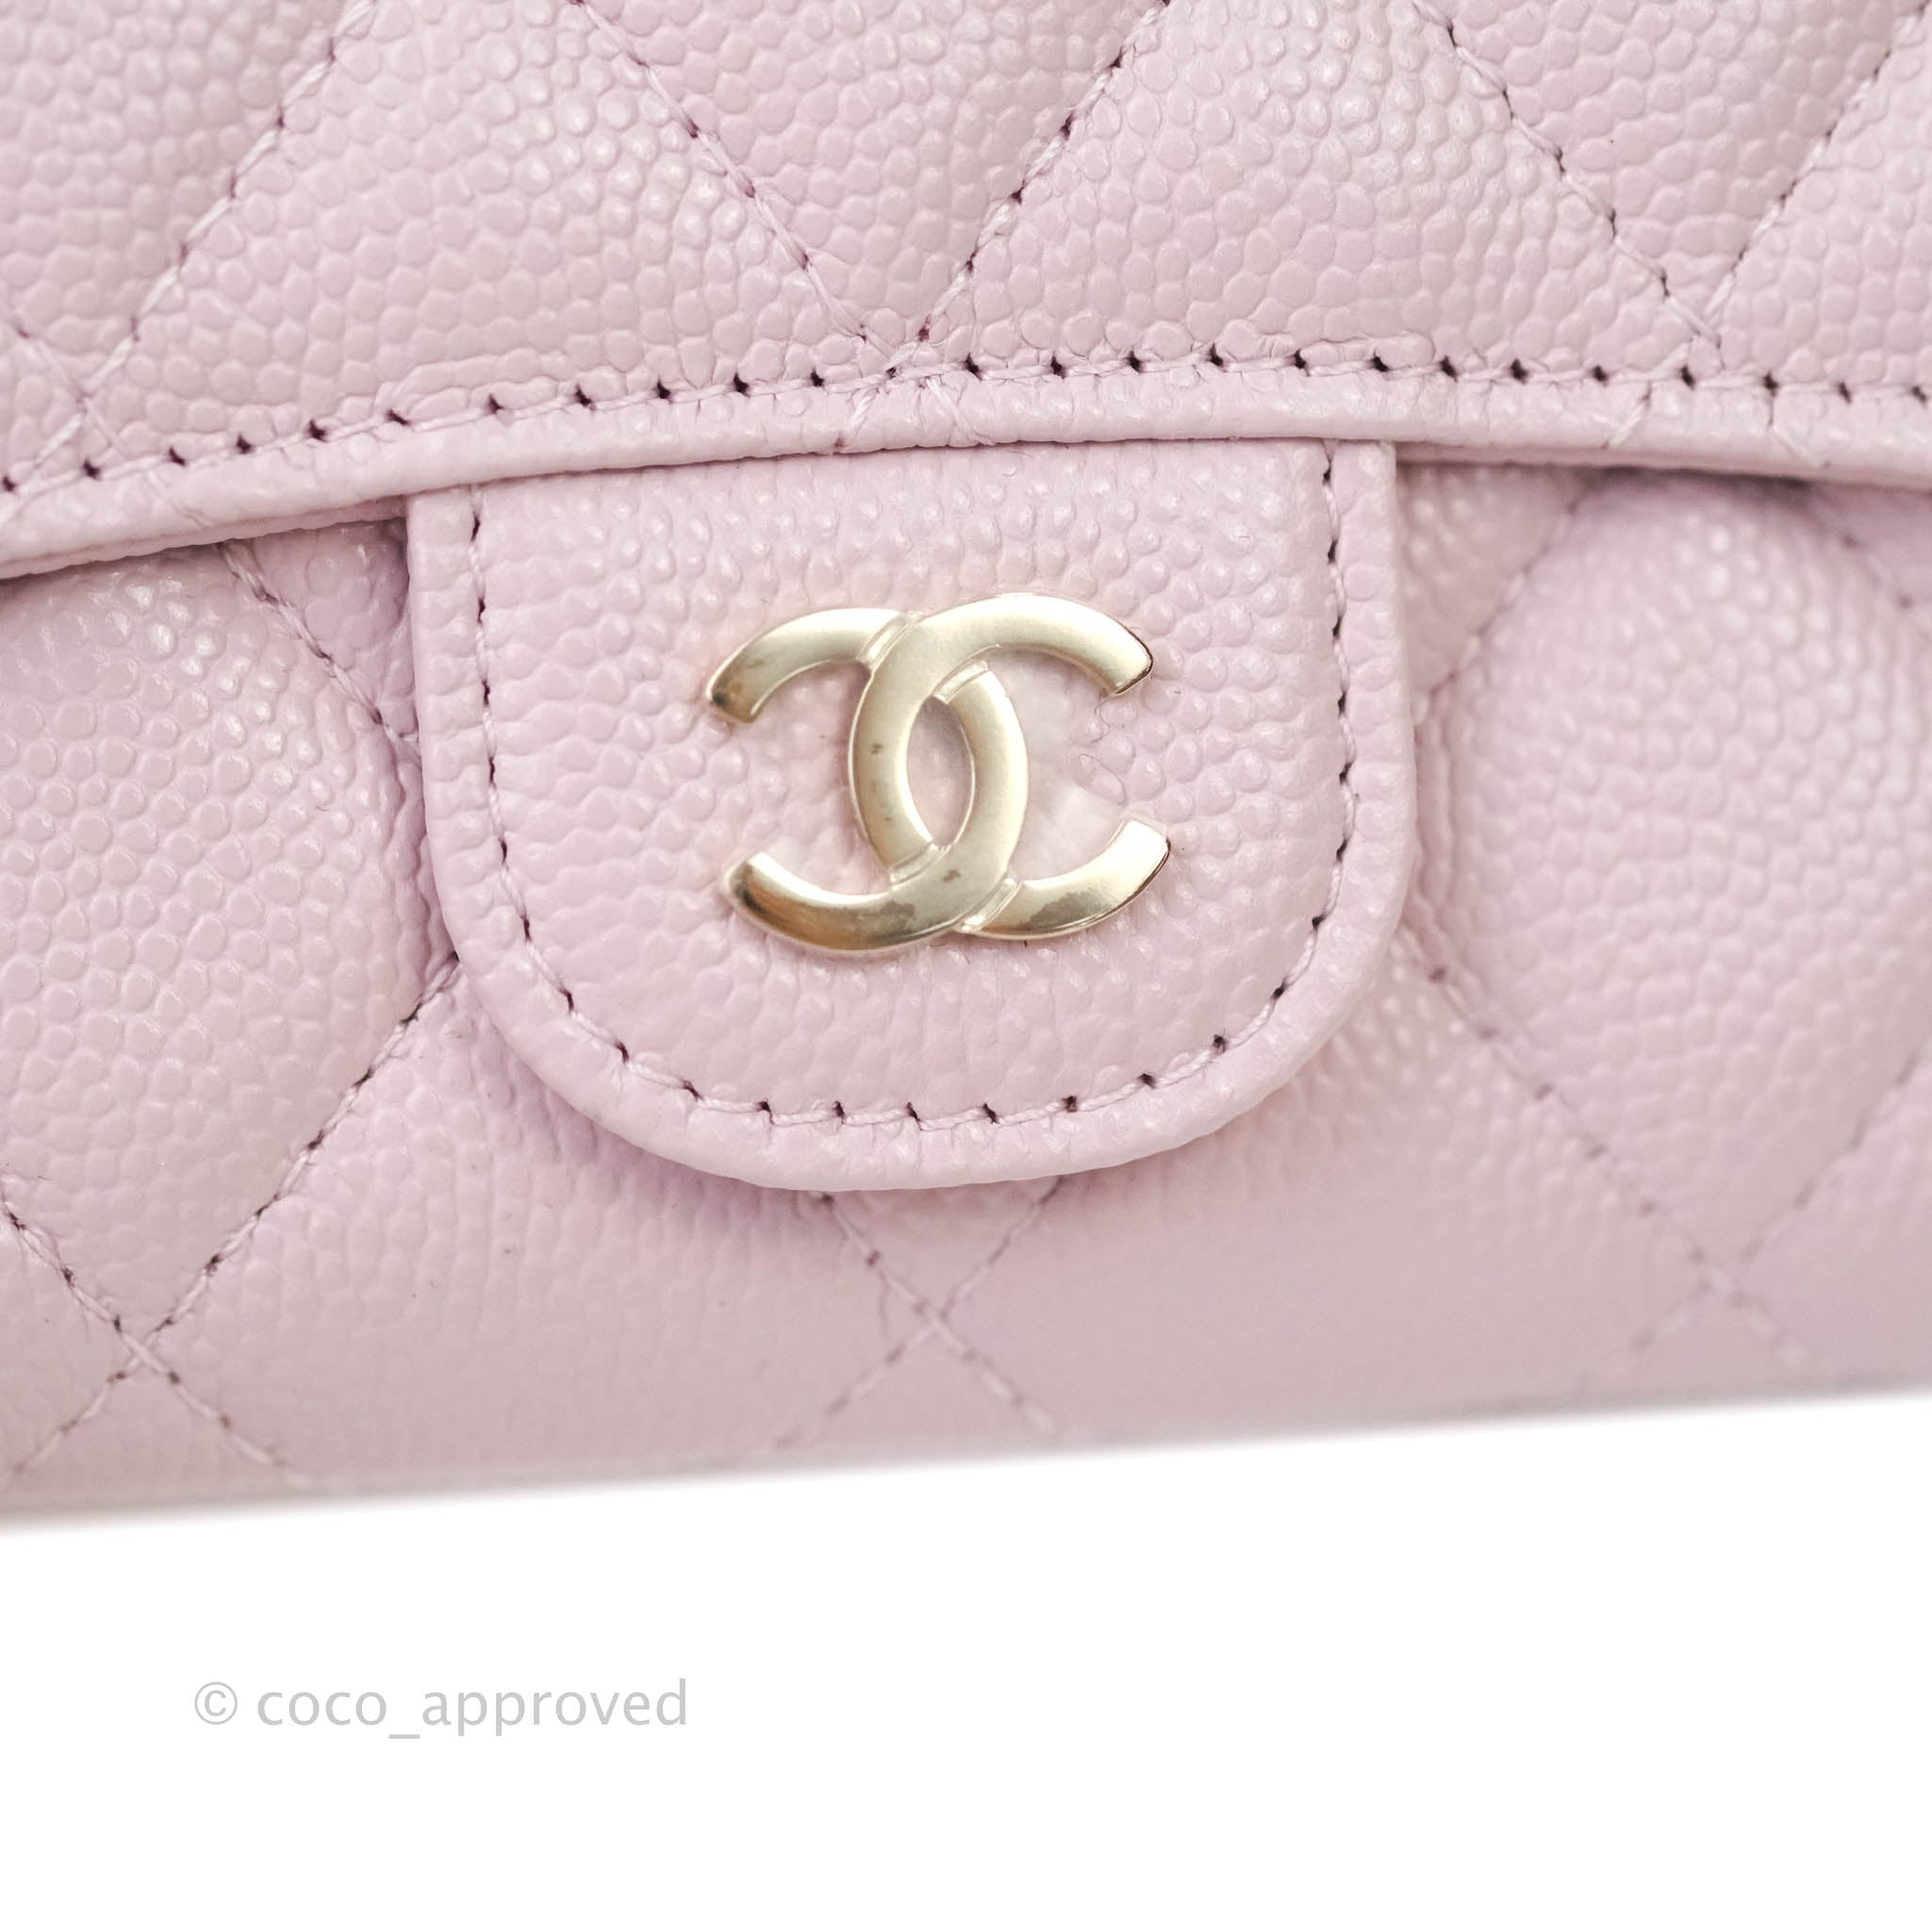 CHANEL Rose Wallets for Women for sale